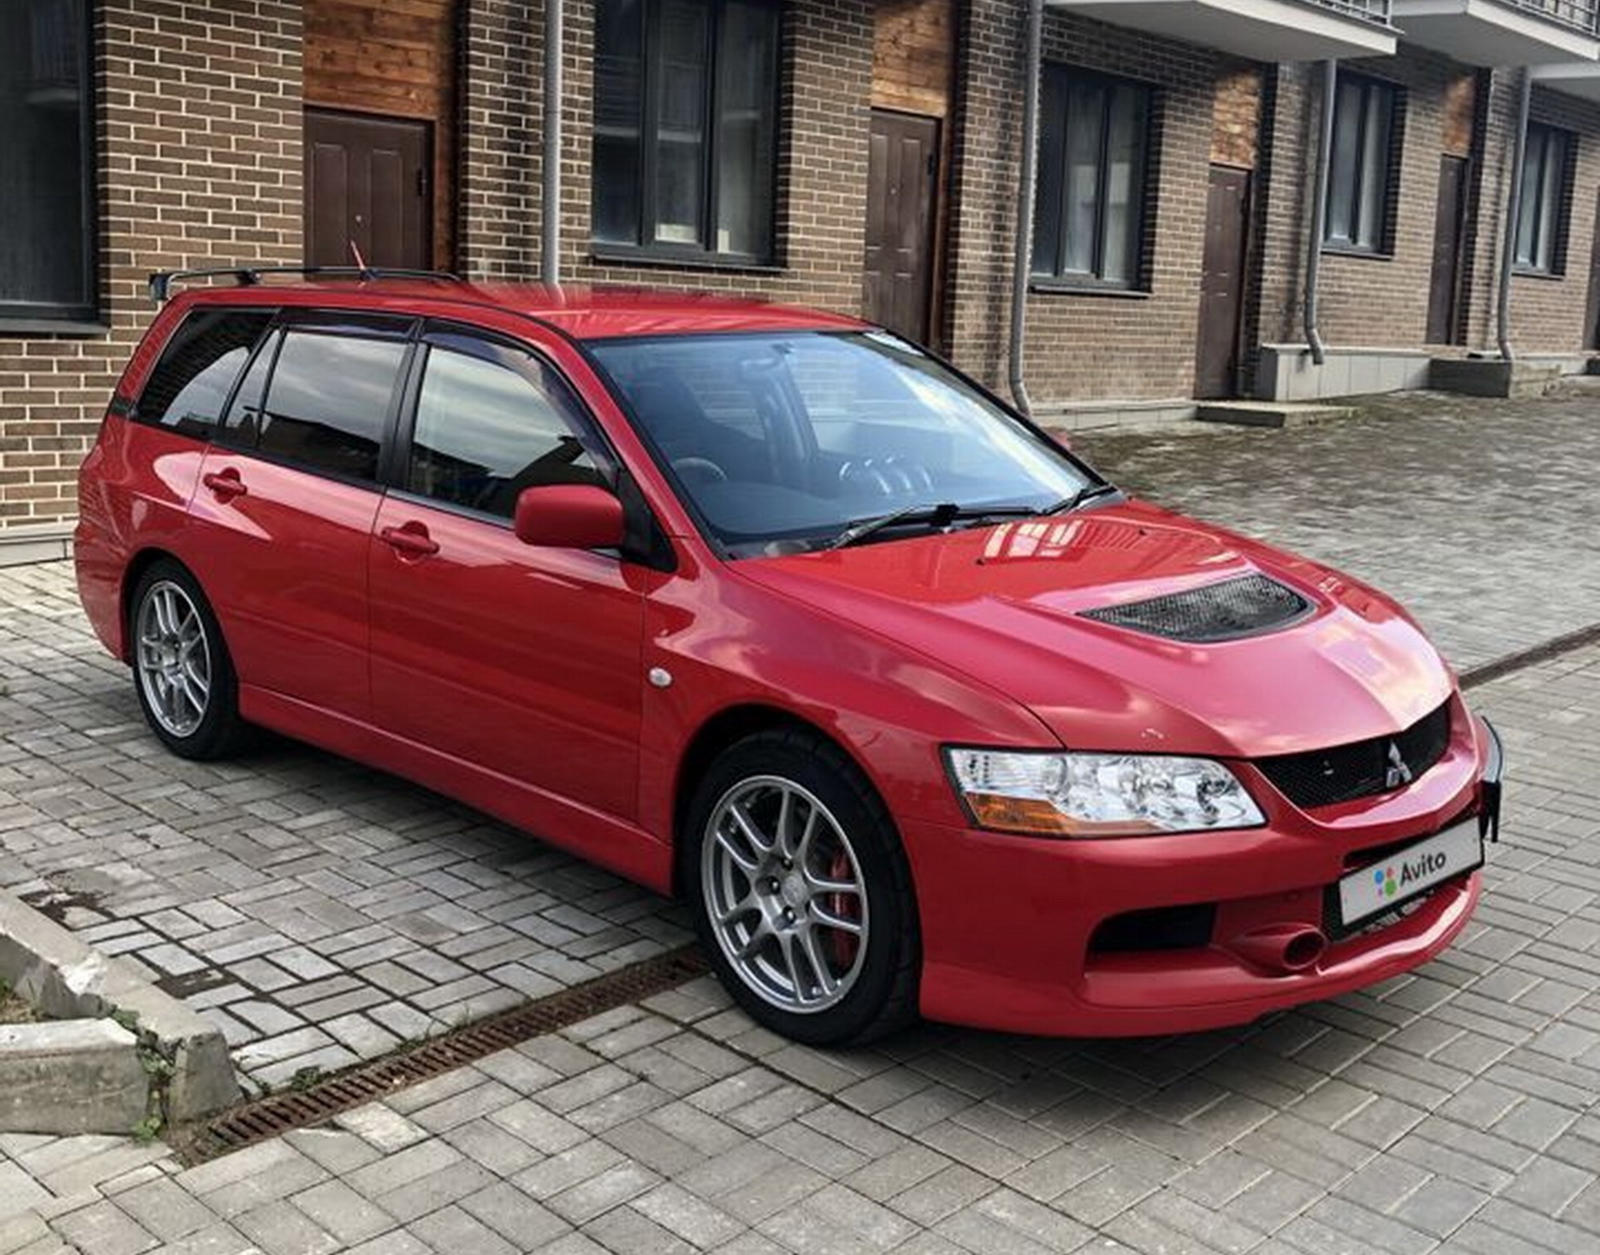 Be The Family Hero With This Extremely Rare Mitsubishi Evo Wagon